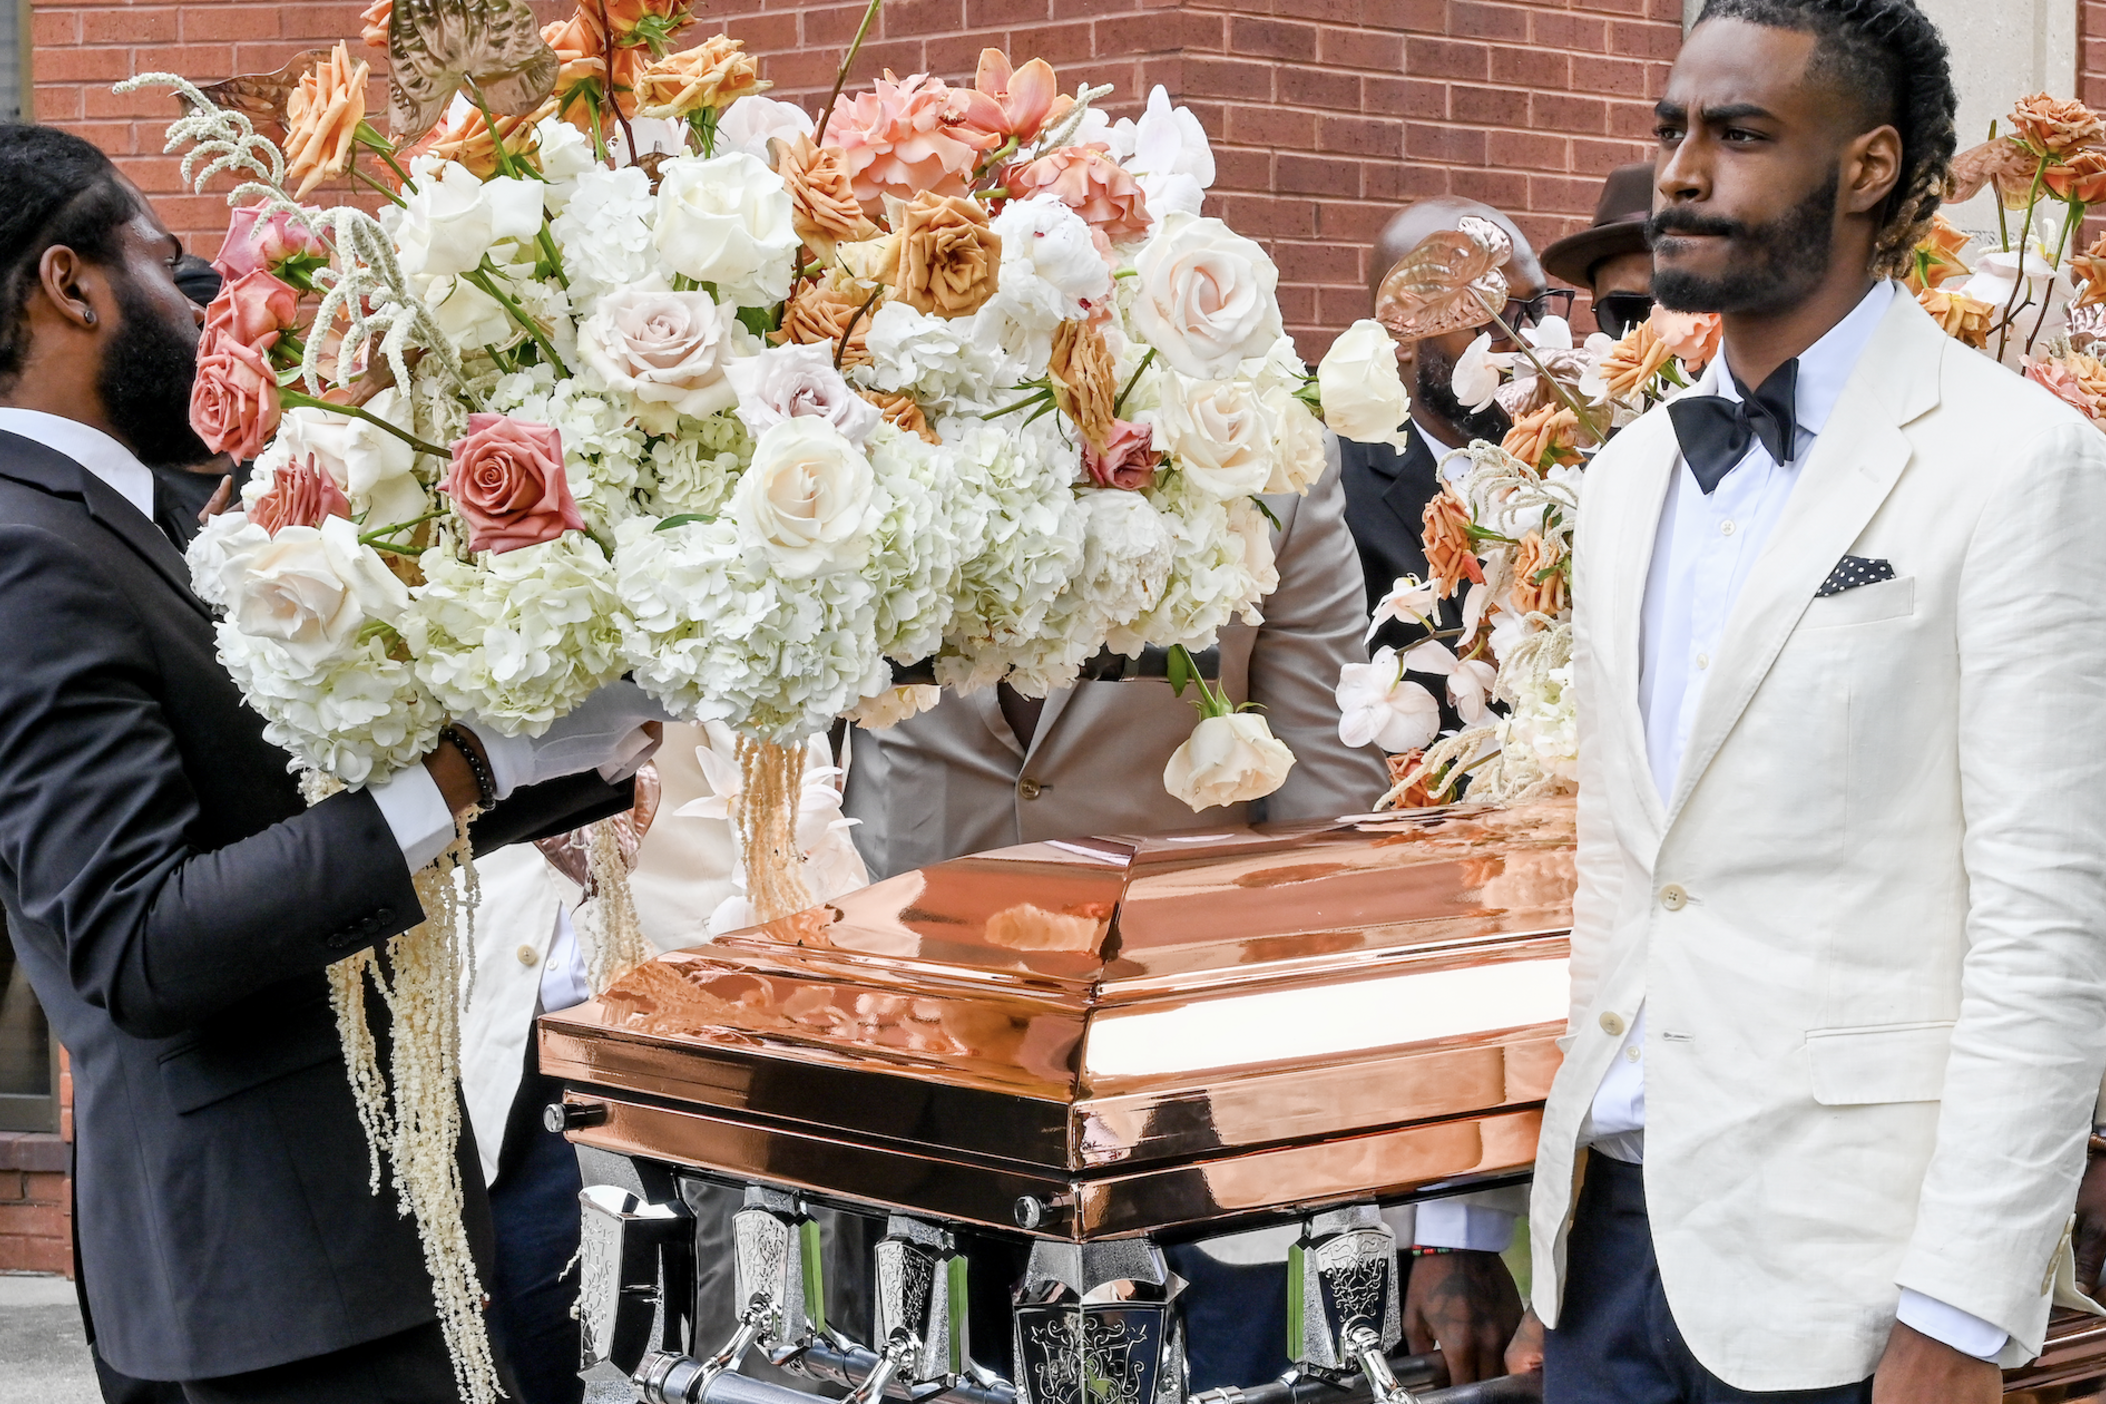 Rico Wade II serves as lead pallbearer at the "celebration of life" for his father Rico Renard Wade, a charismatic architect of Atlanta's contemporary music scene.